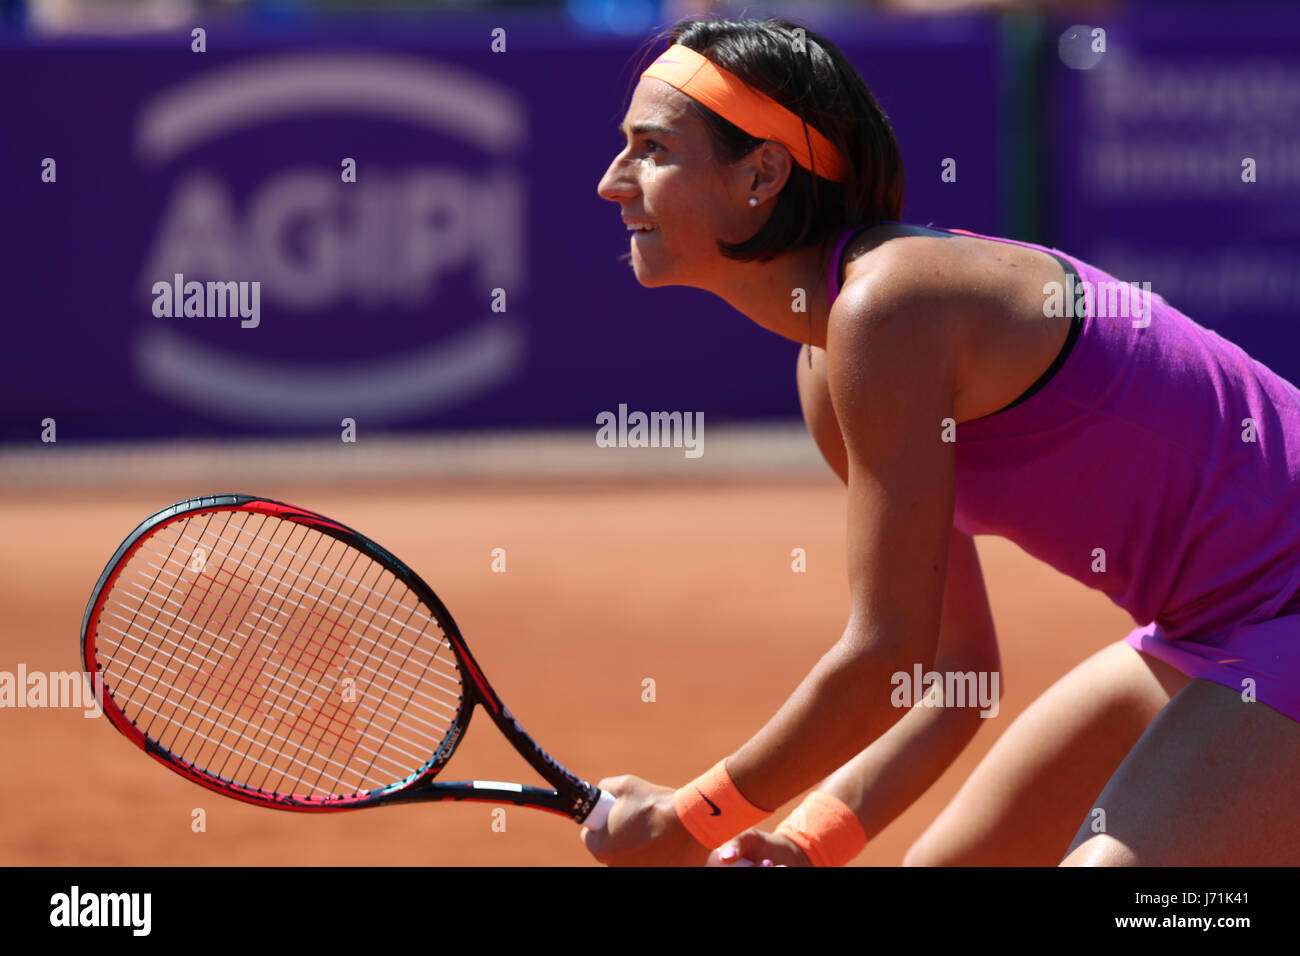 Strasbourg, France. 22nd May, 2017. French tennis player Caroline Garcia is in action during her match in the 1st round of the WTA tennis Internationaux of Strasbourg vs American player Jennifer Brady on May 22, 2017 in Strasbourg, France - Credit: Yan Lerval/Alamy Live News Stock Photo